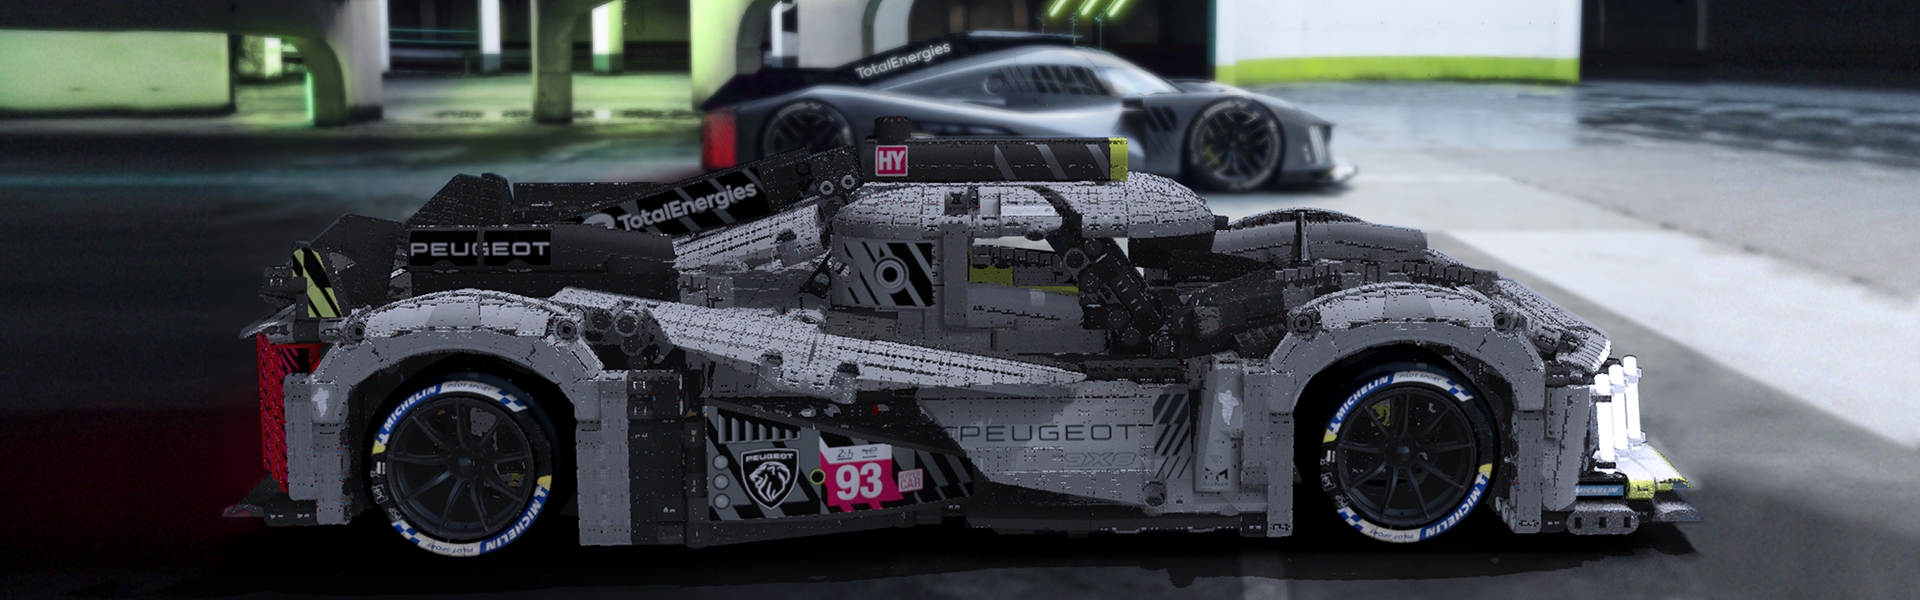 Scaling up a Le Mans Hypercar with LEGO® elements | Official LEGO